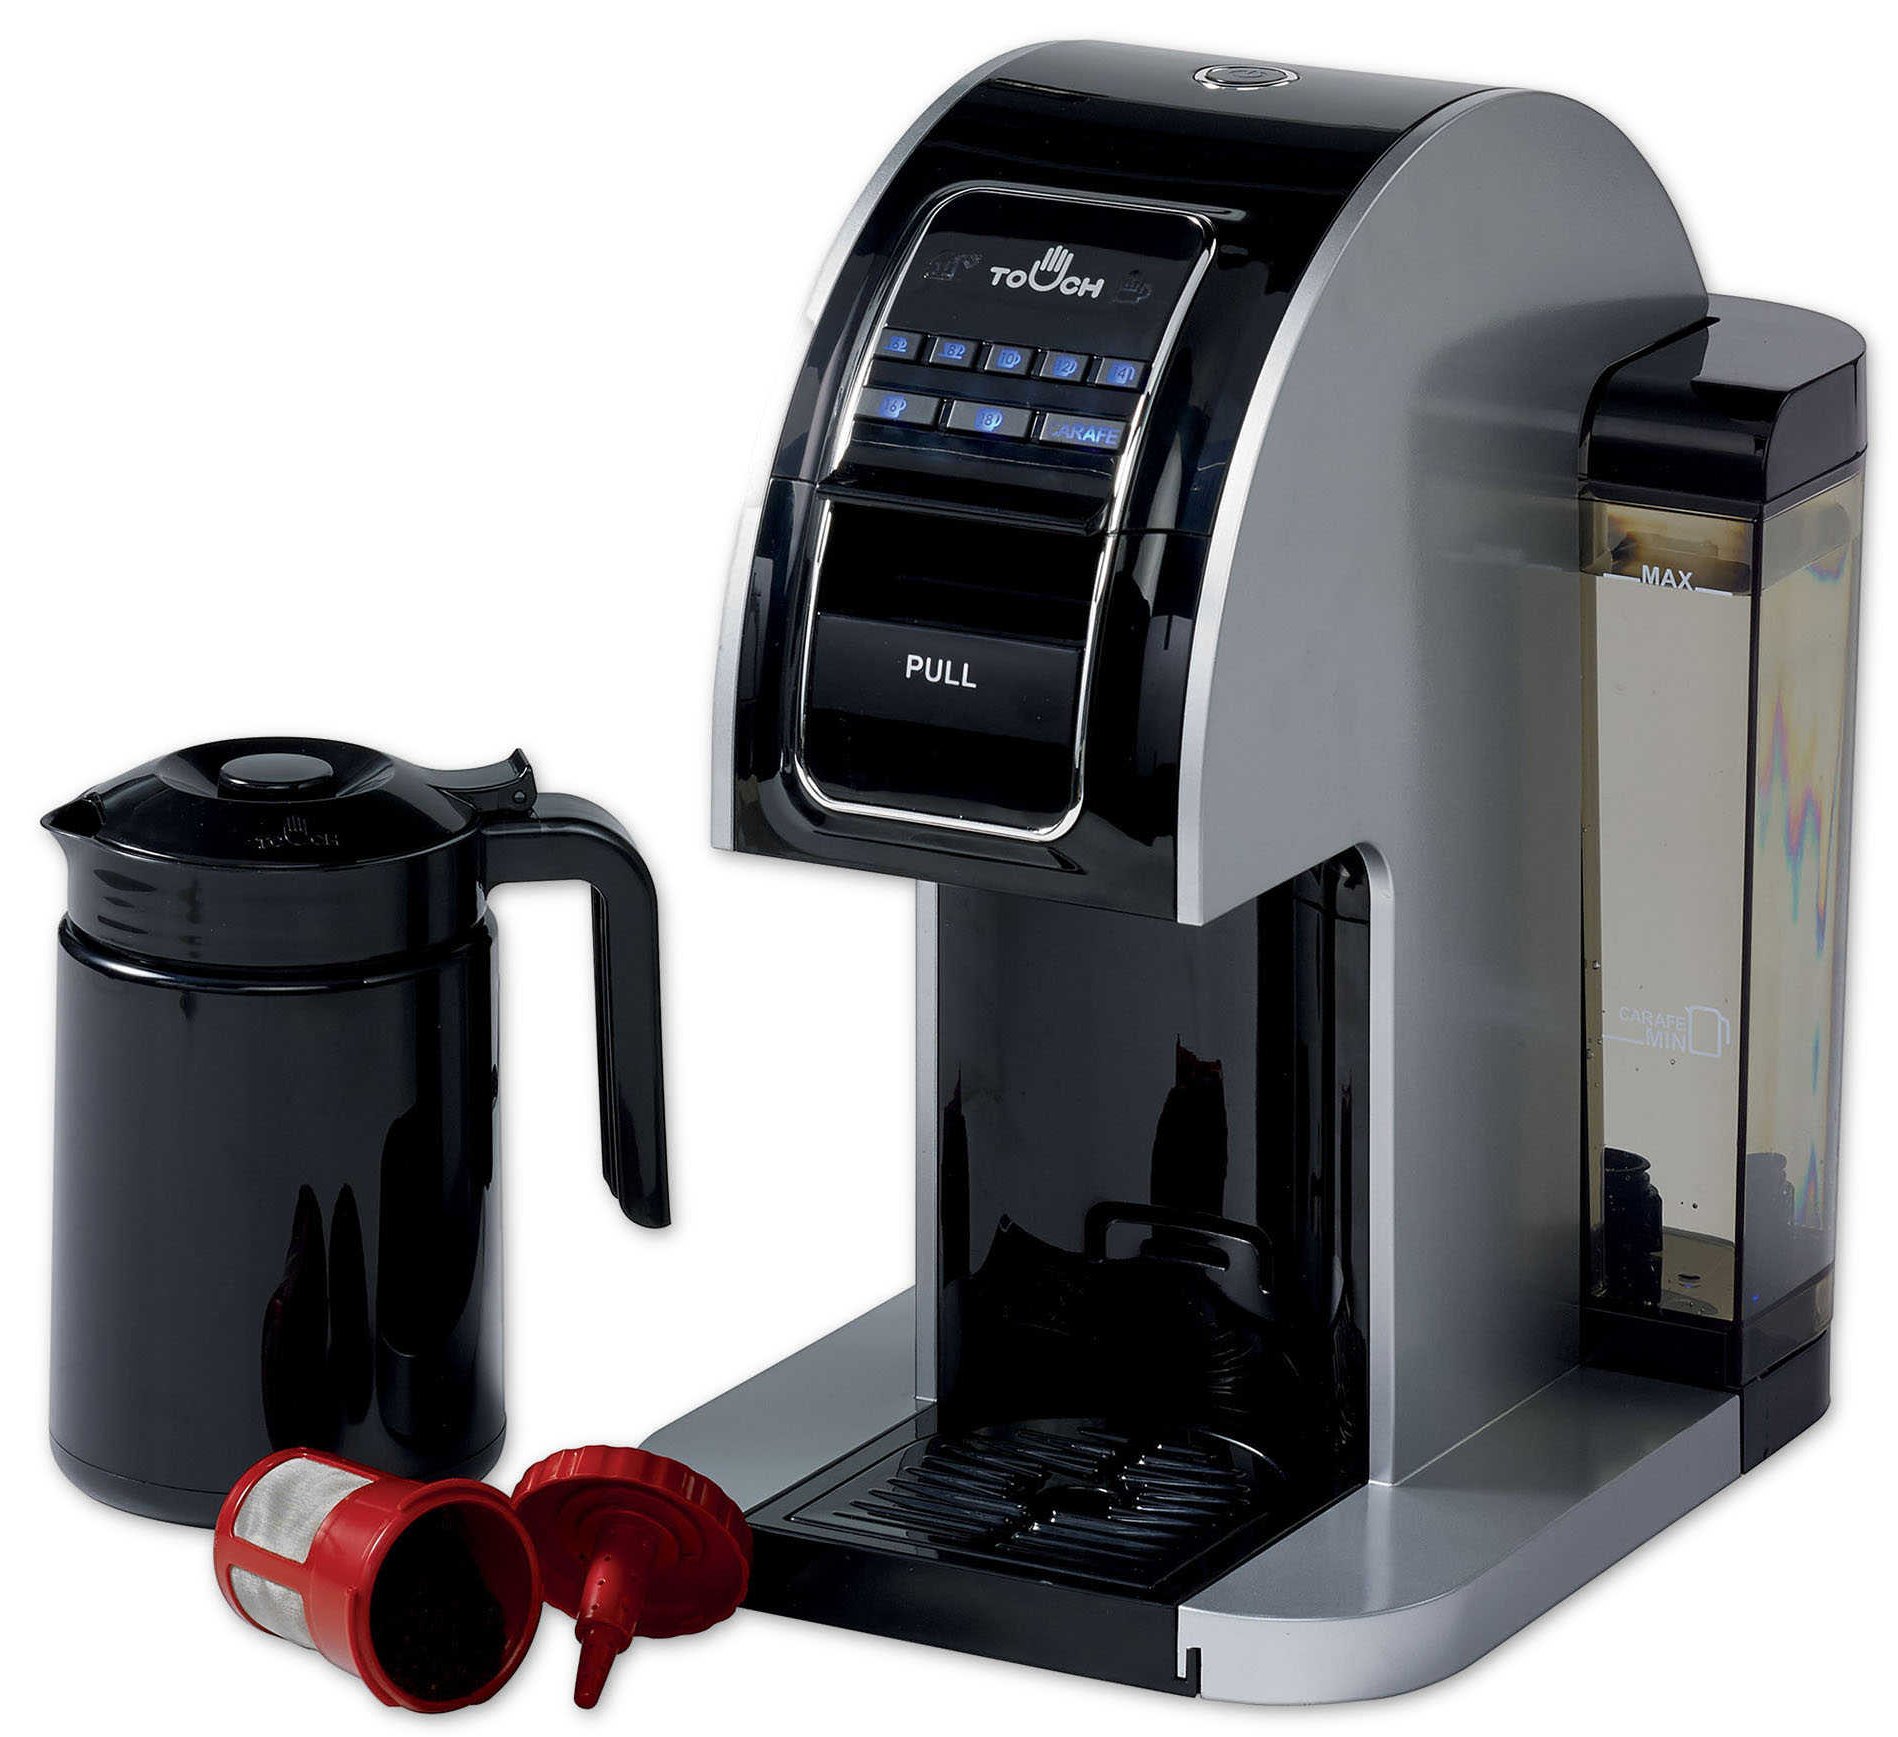 TouchPlus T526S from Touch Coffee